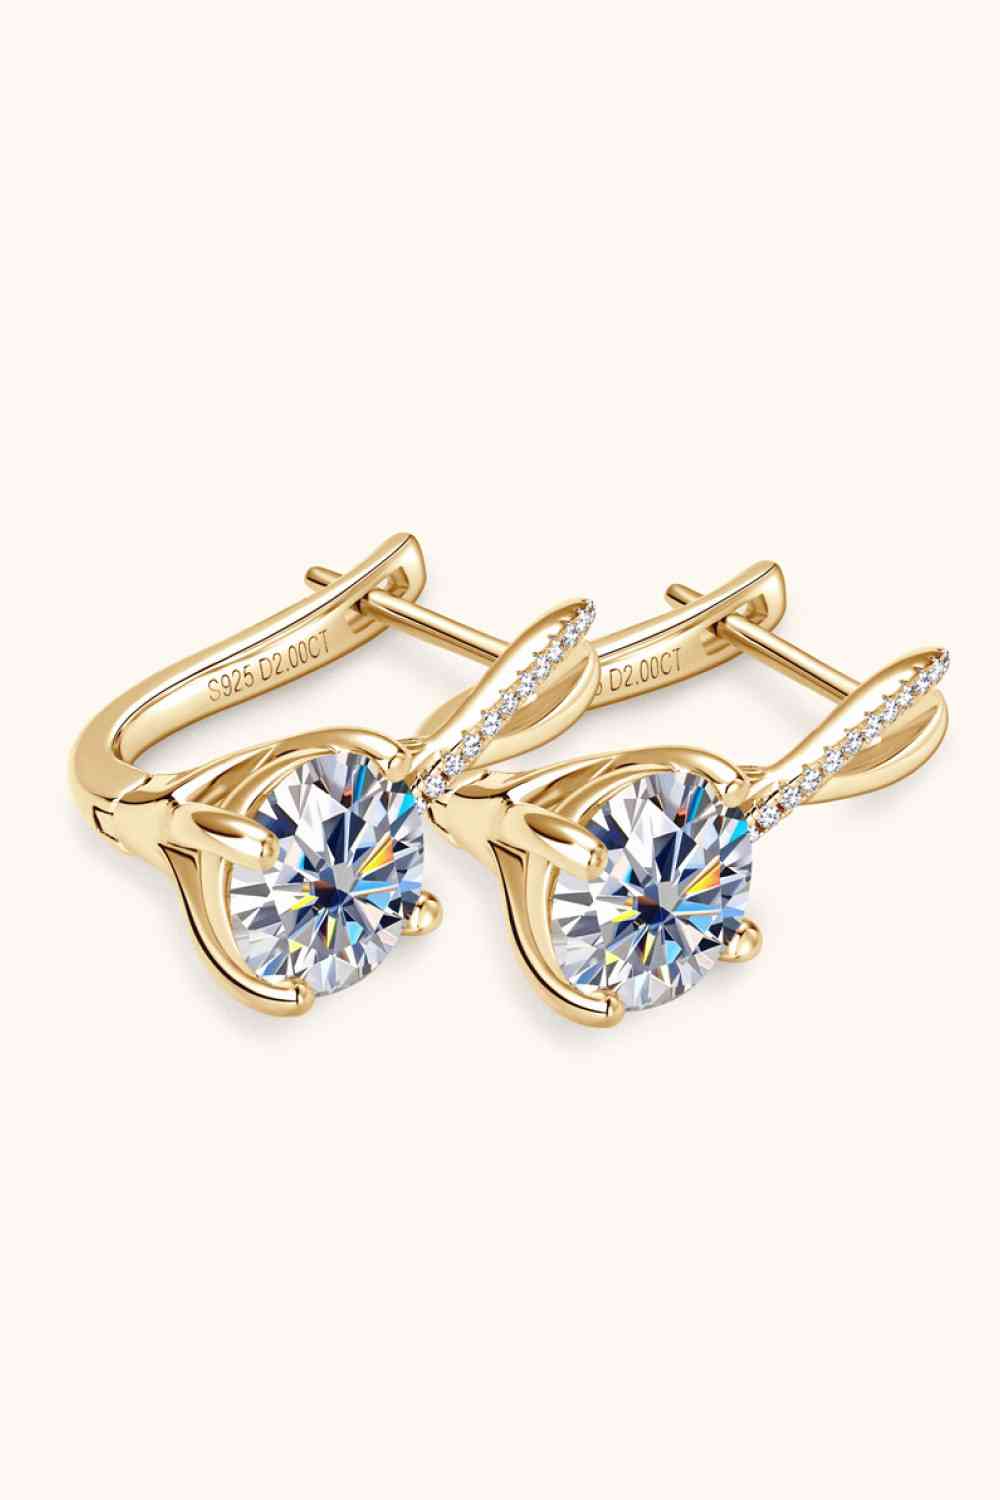 a pair of gold tone earrings with crystal stones